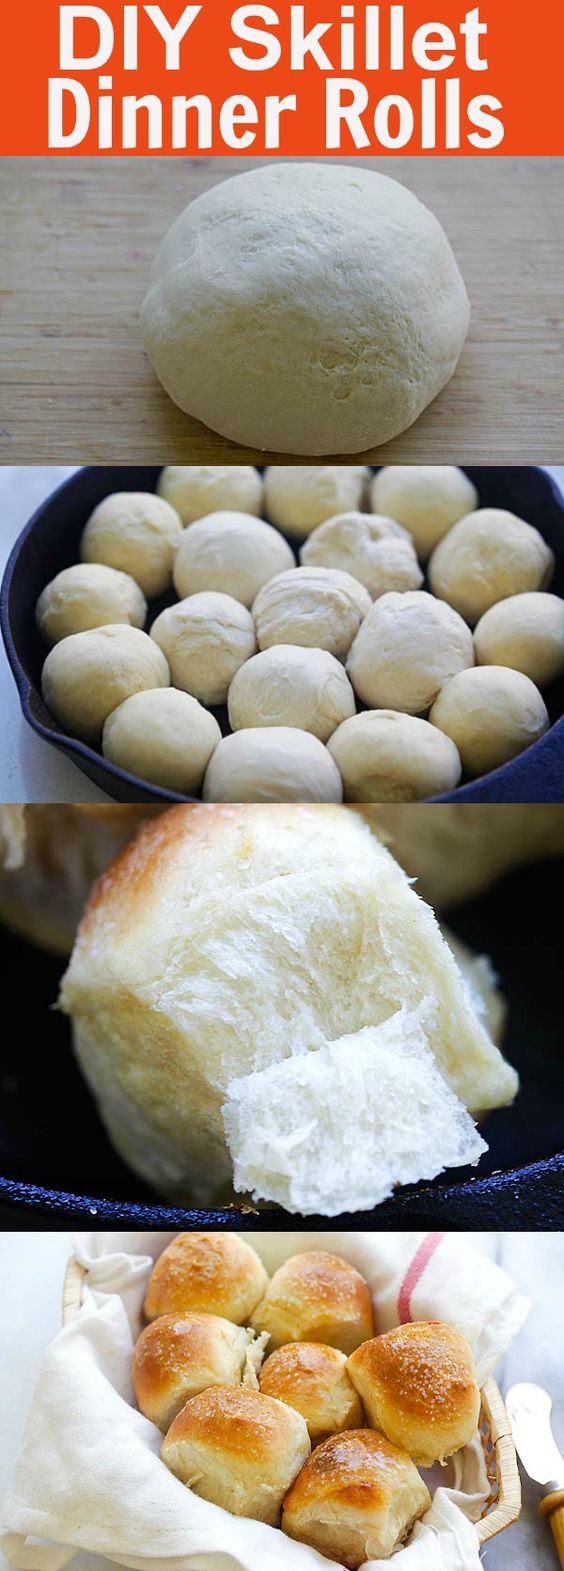 Skillet Dinner Rolls - easiest and best homemade dinner rolls on skillet. Much better than store-bought and takes 60 minutes | rasamalaysia.com